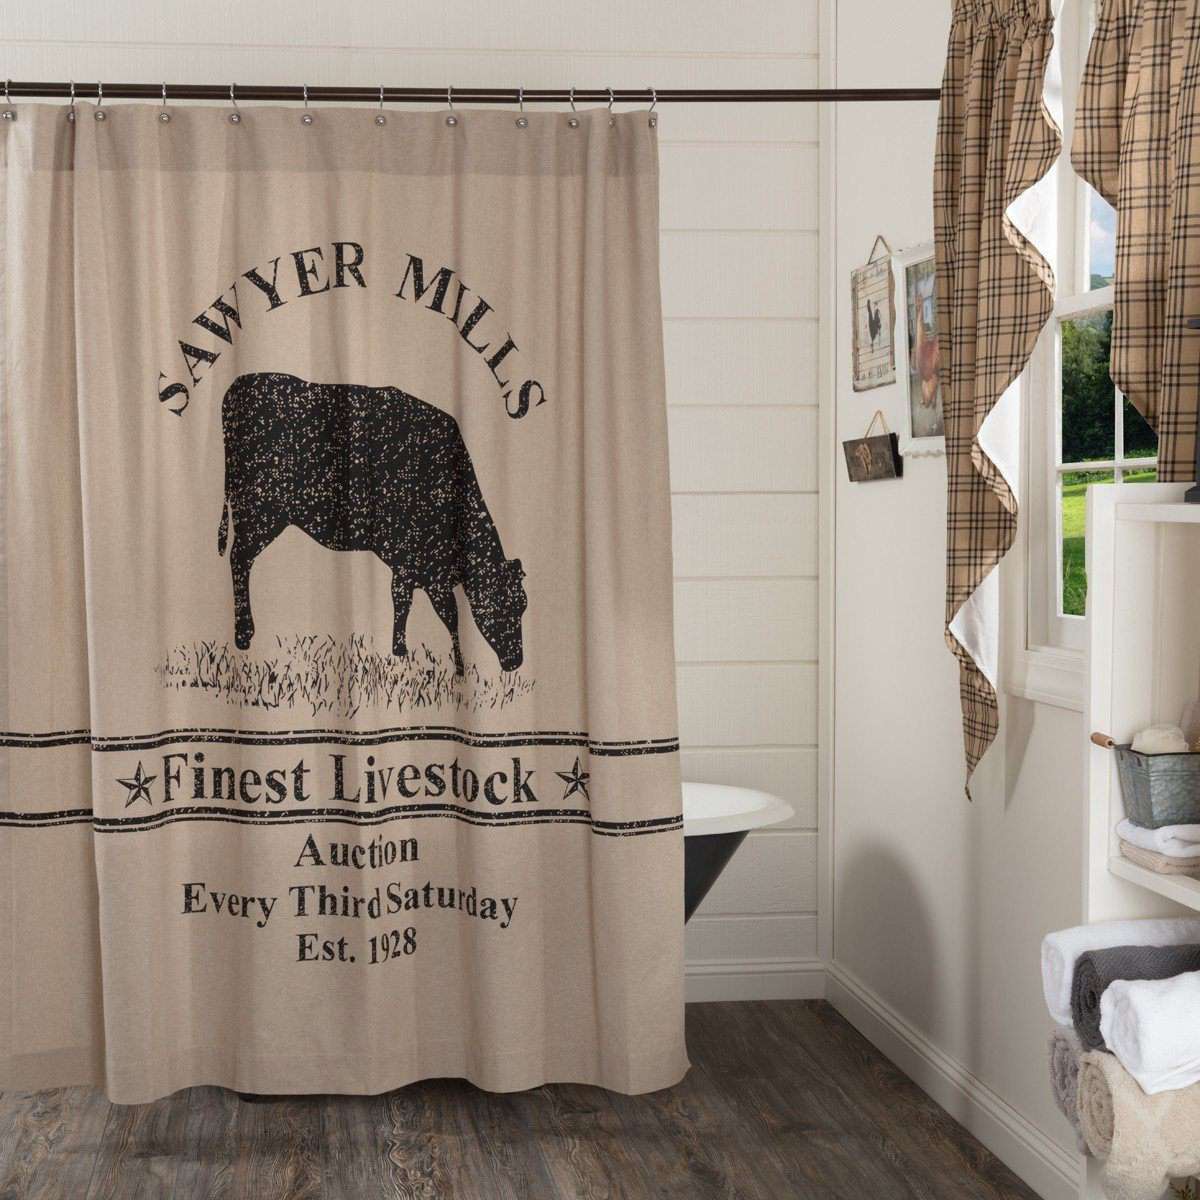 Sawyer Mill Charcoal Cow Shower Curtain 72"x72" curtain VHC Brands 